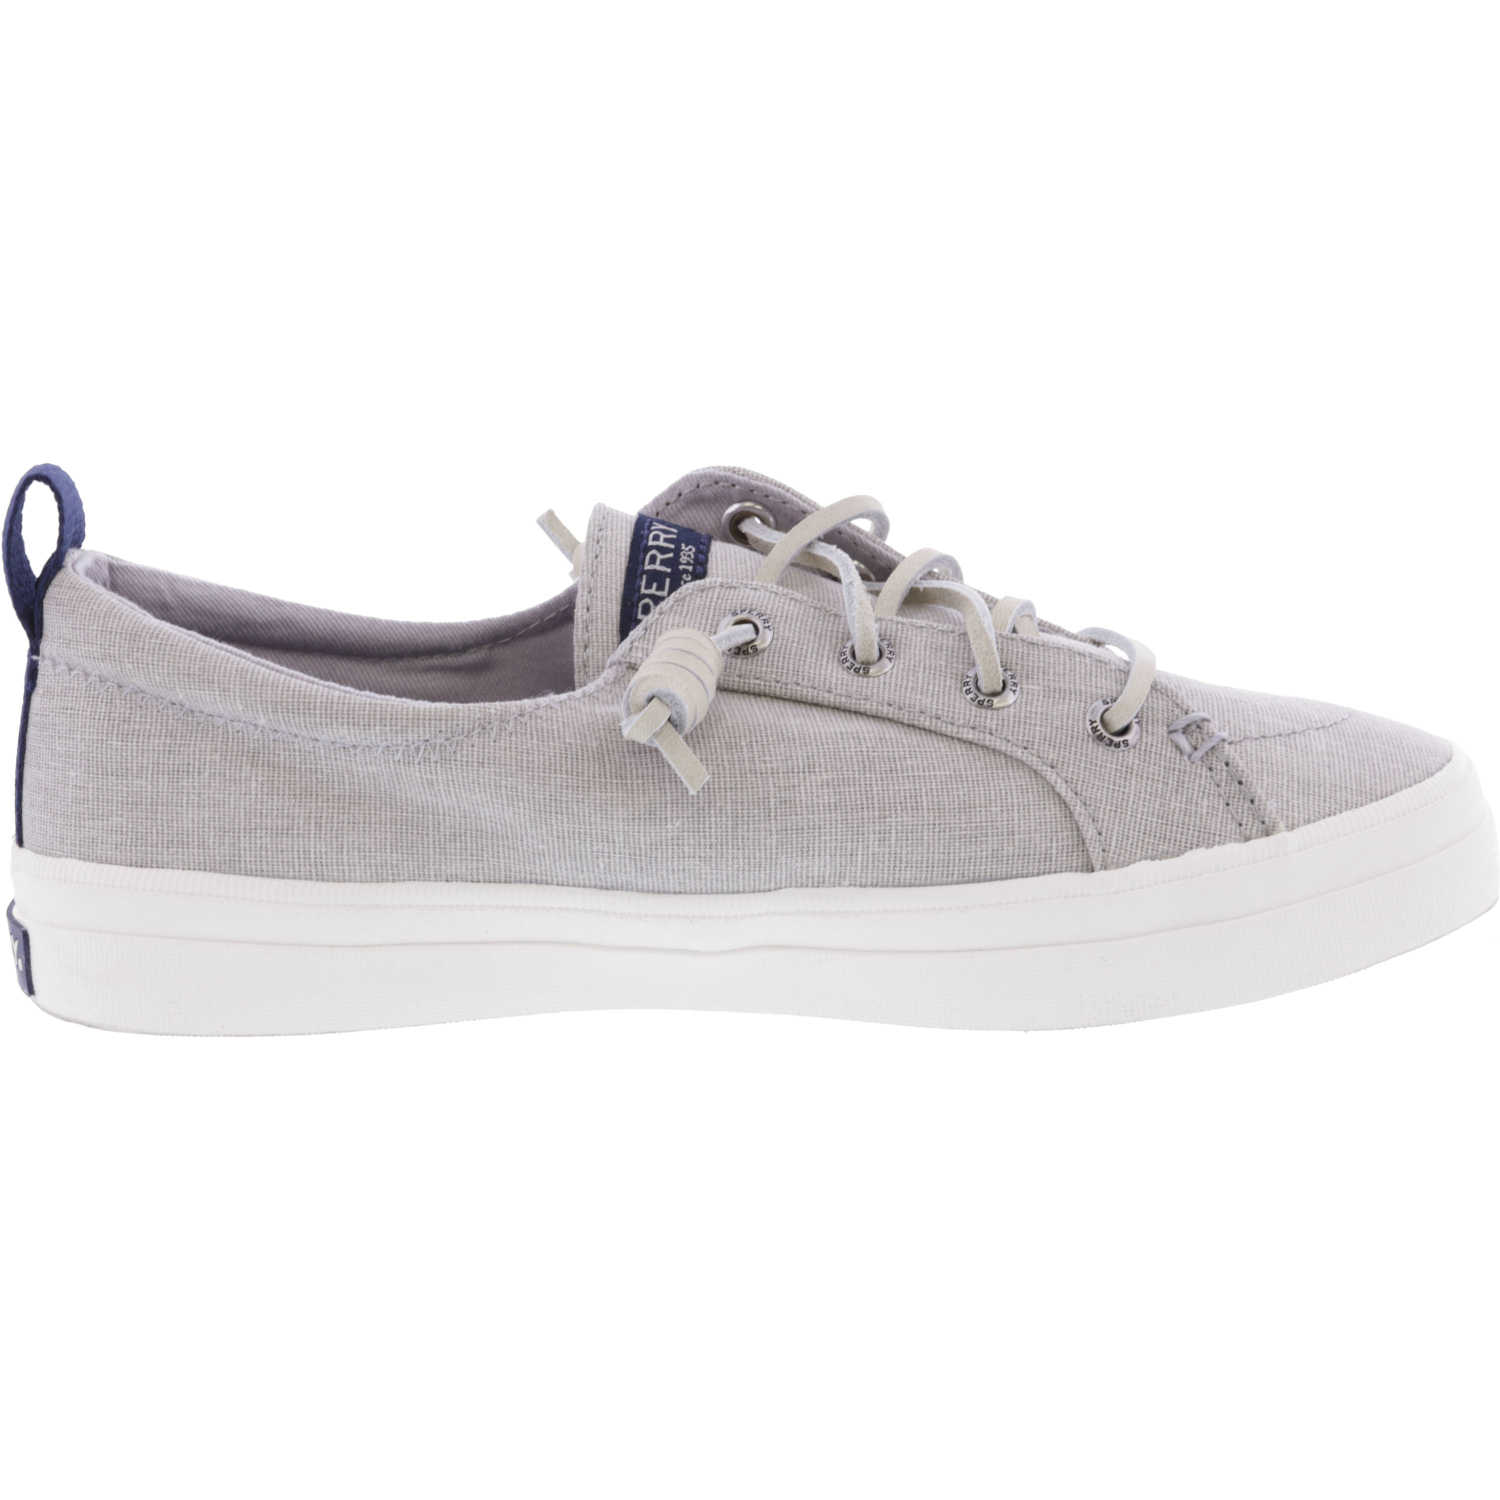 Sperry Women's Crest Vibe Ankle-High Canvas Sneaker | eBay